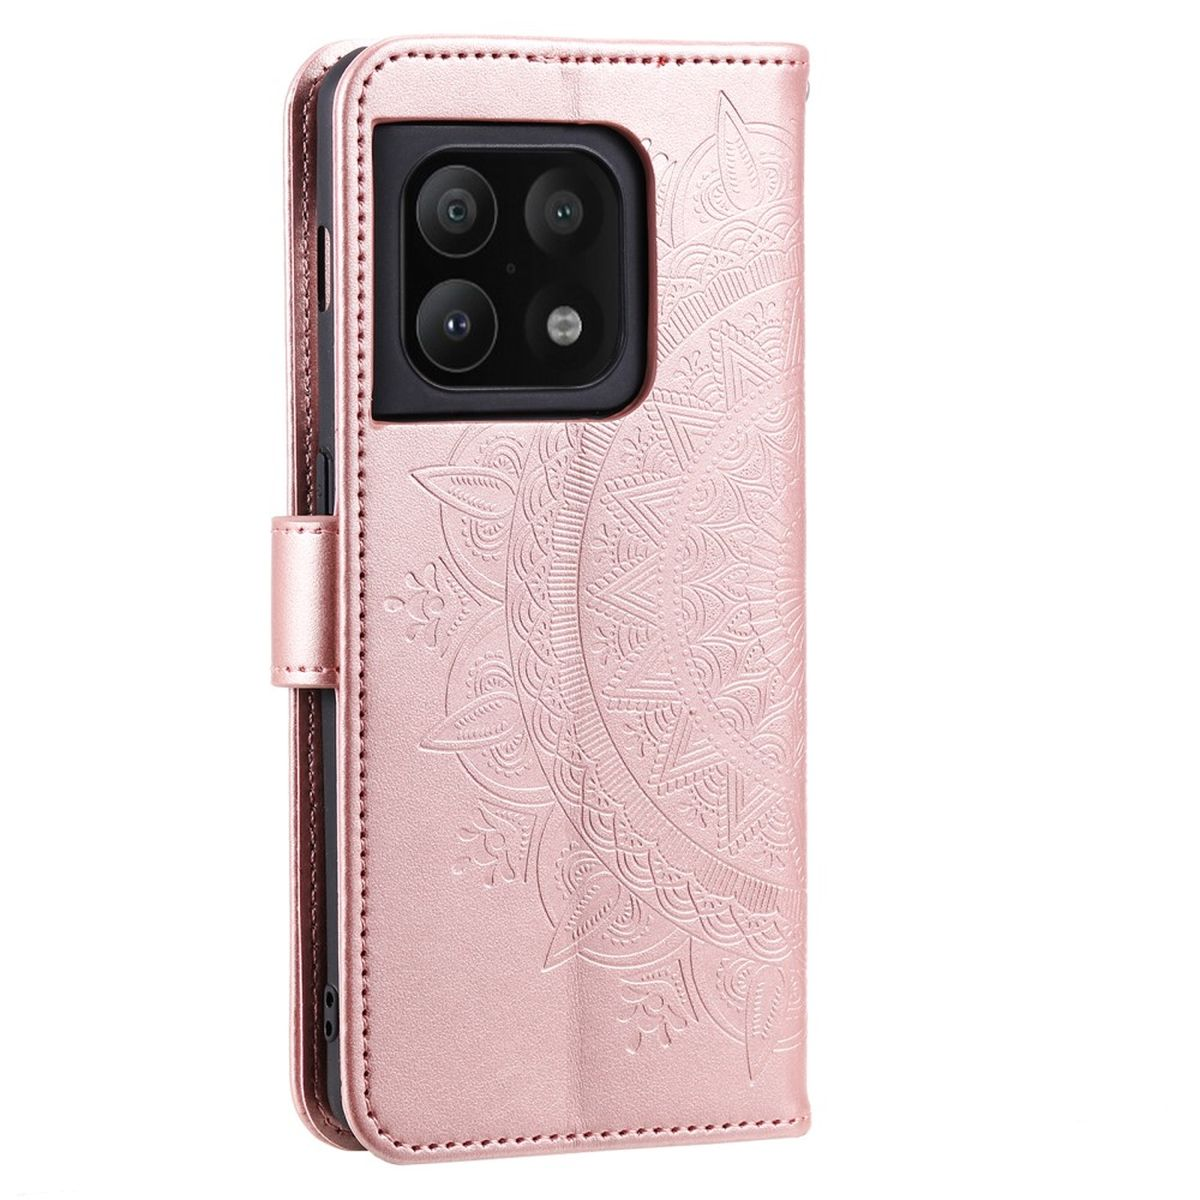 Pro Klapphülle Rosegold 5G, Muster, Bookcover, OnePlus, Mandala COVERKINGZ 10 mit